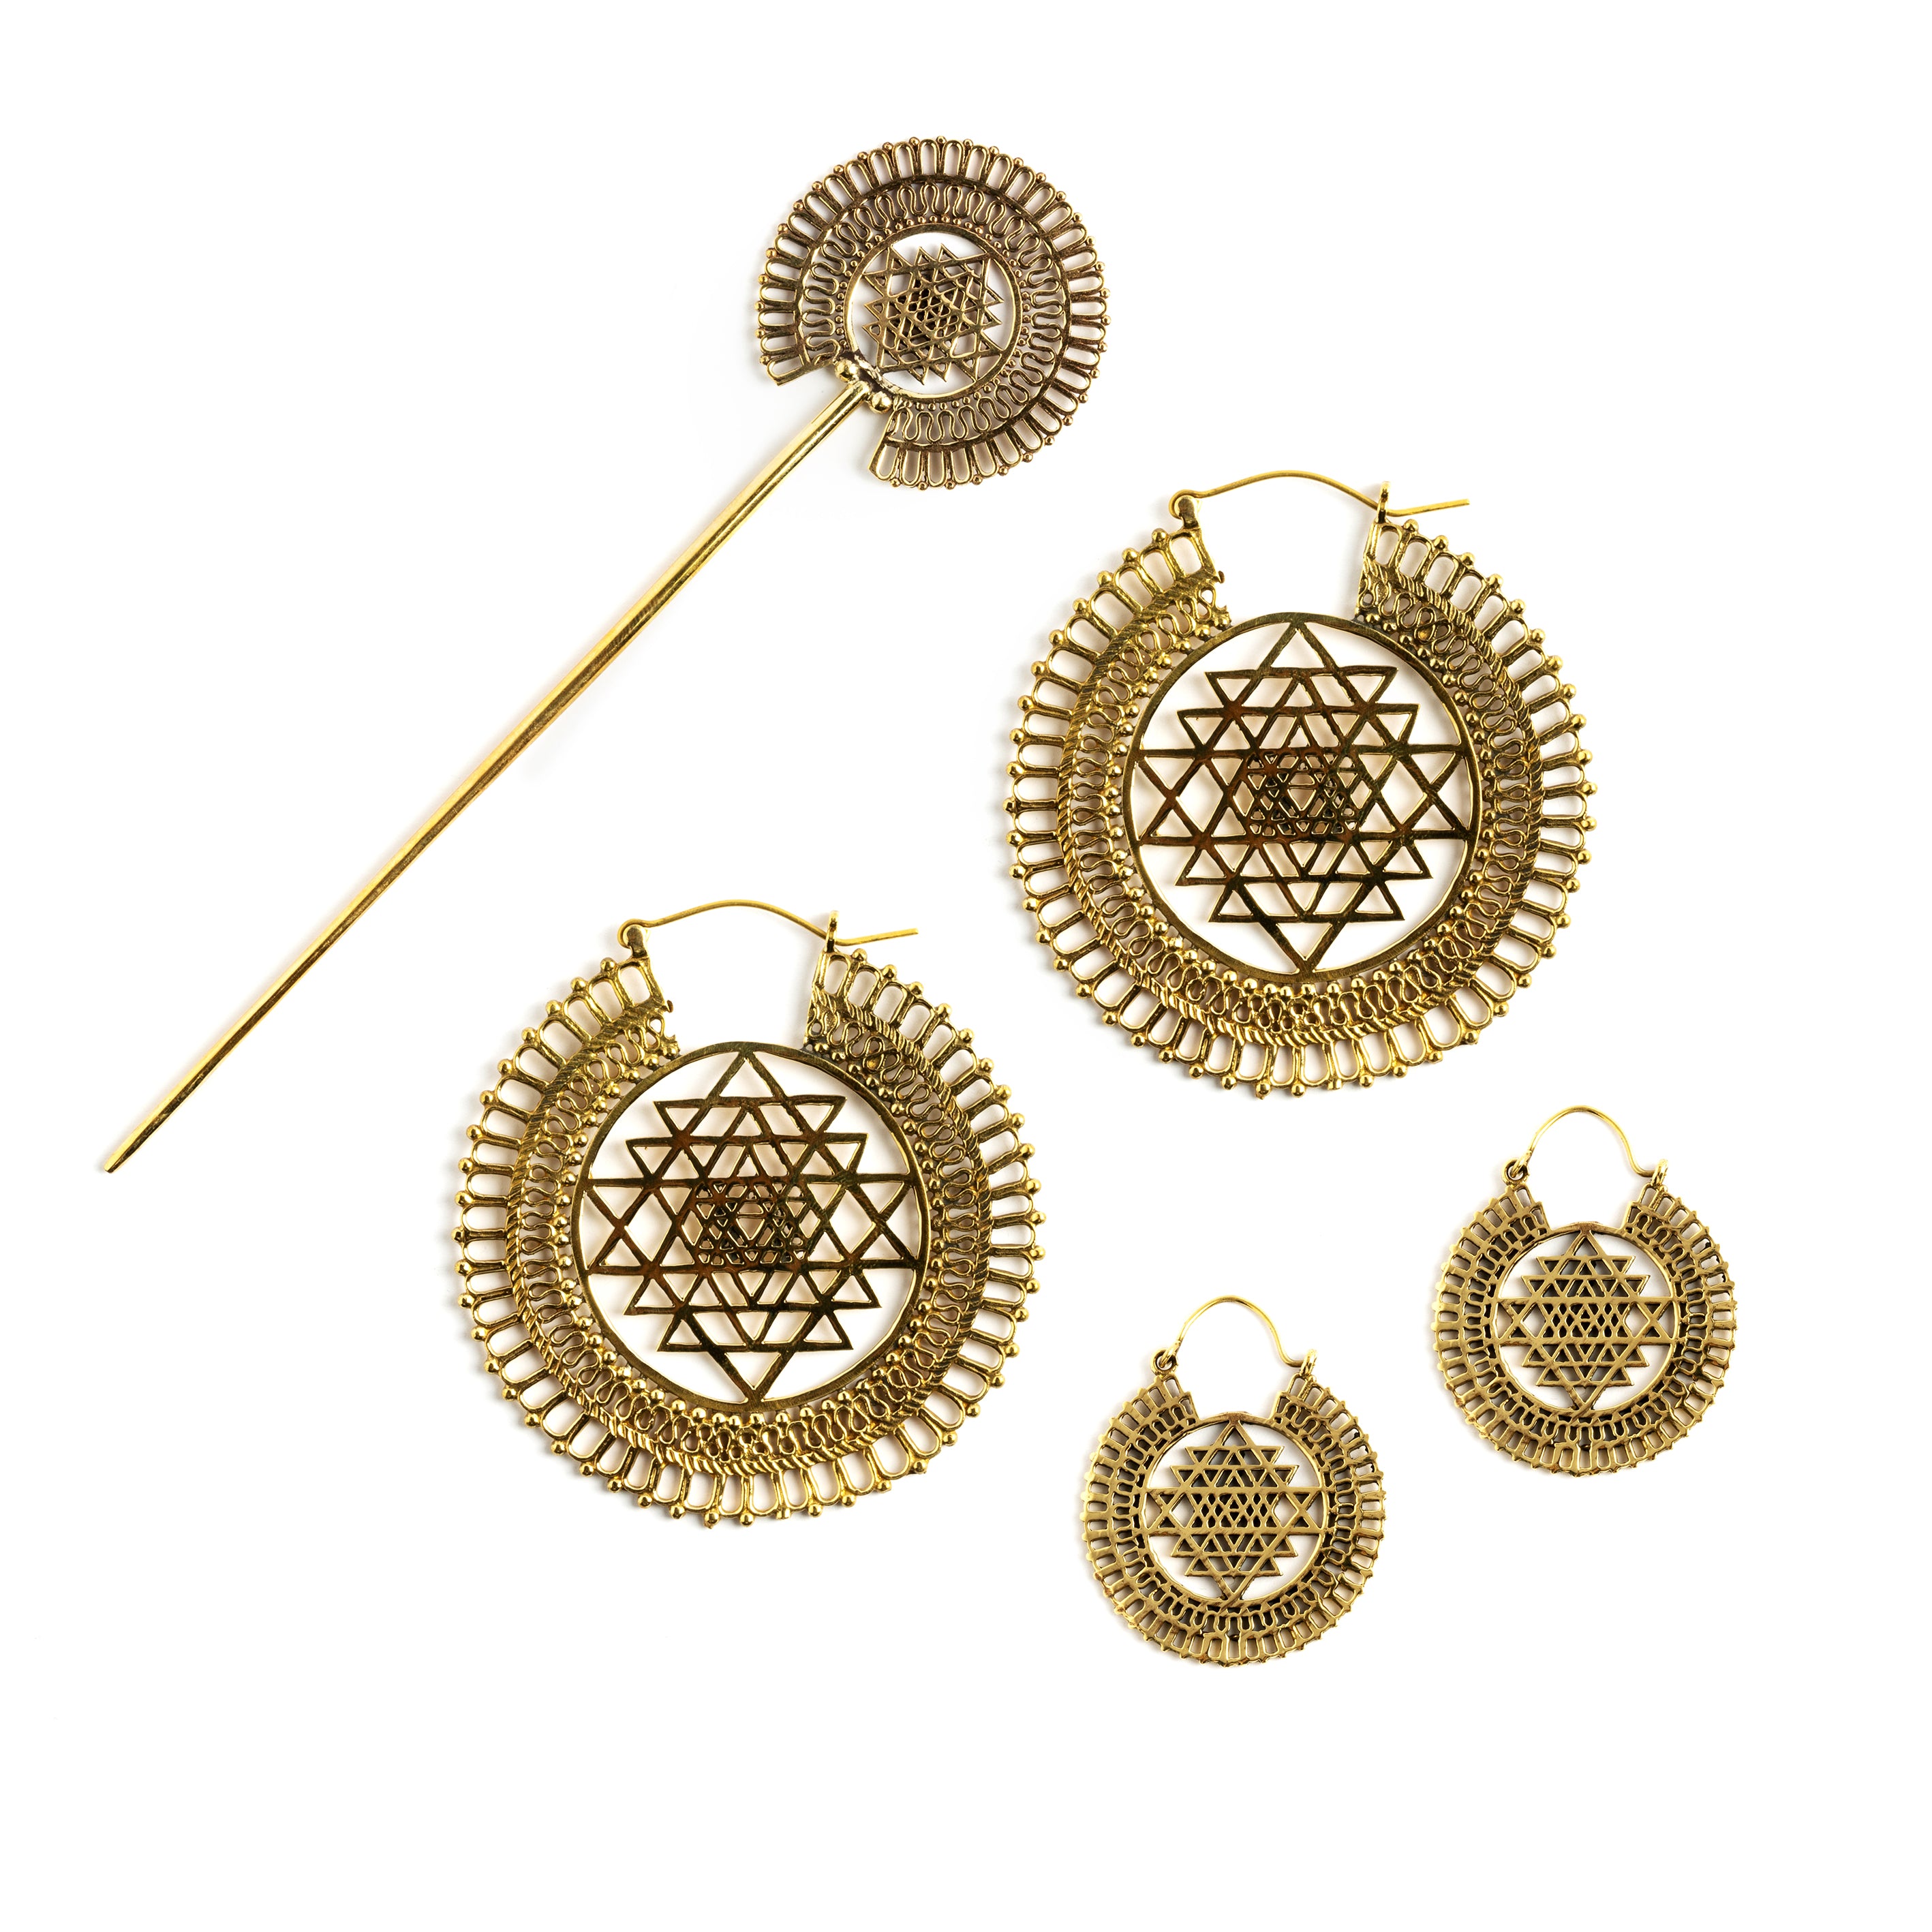 Sri Yantra Brass Hoops small and medium sizes and matching hair stick